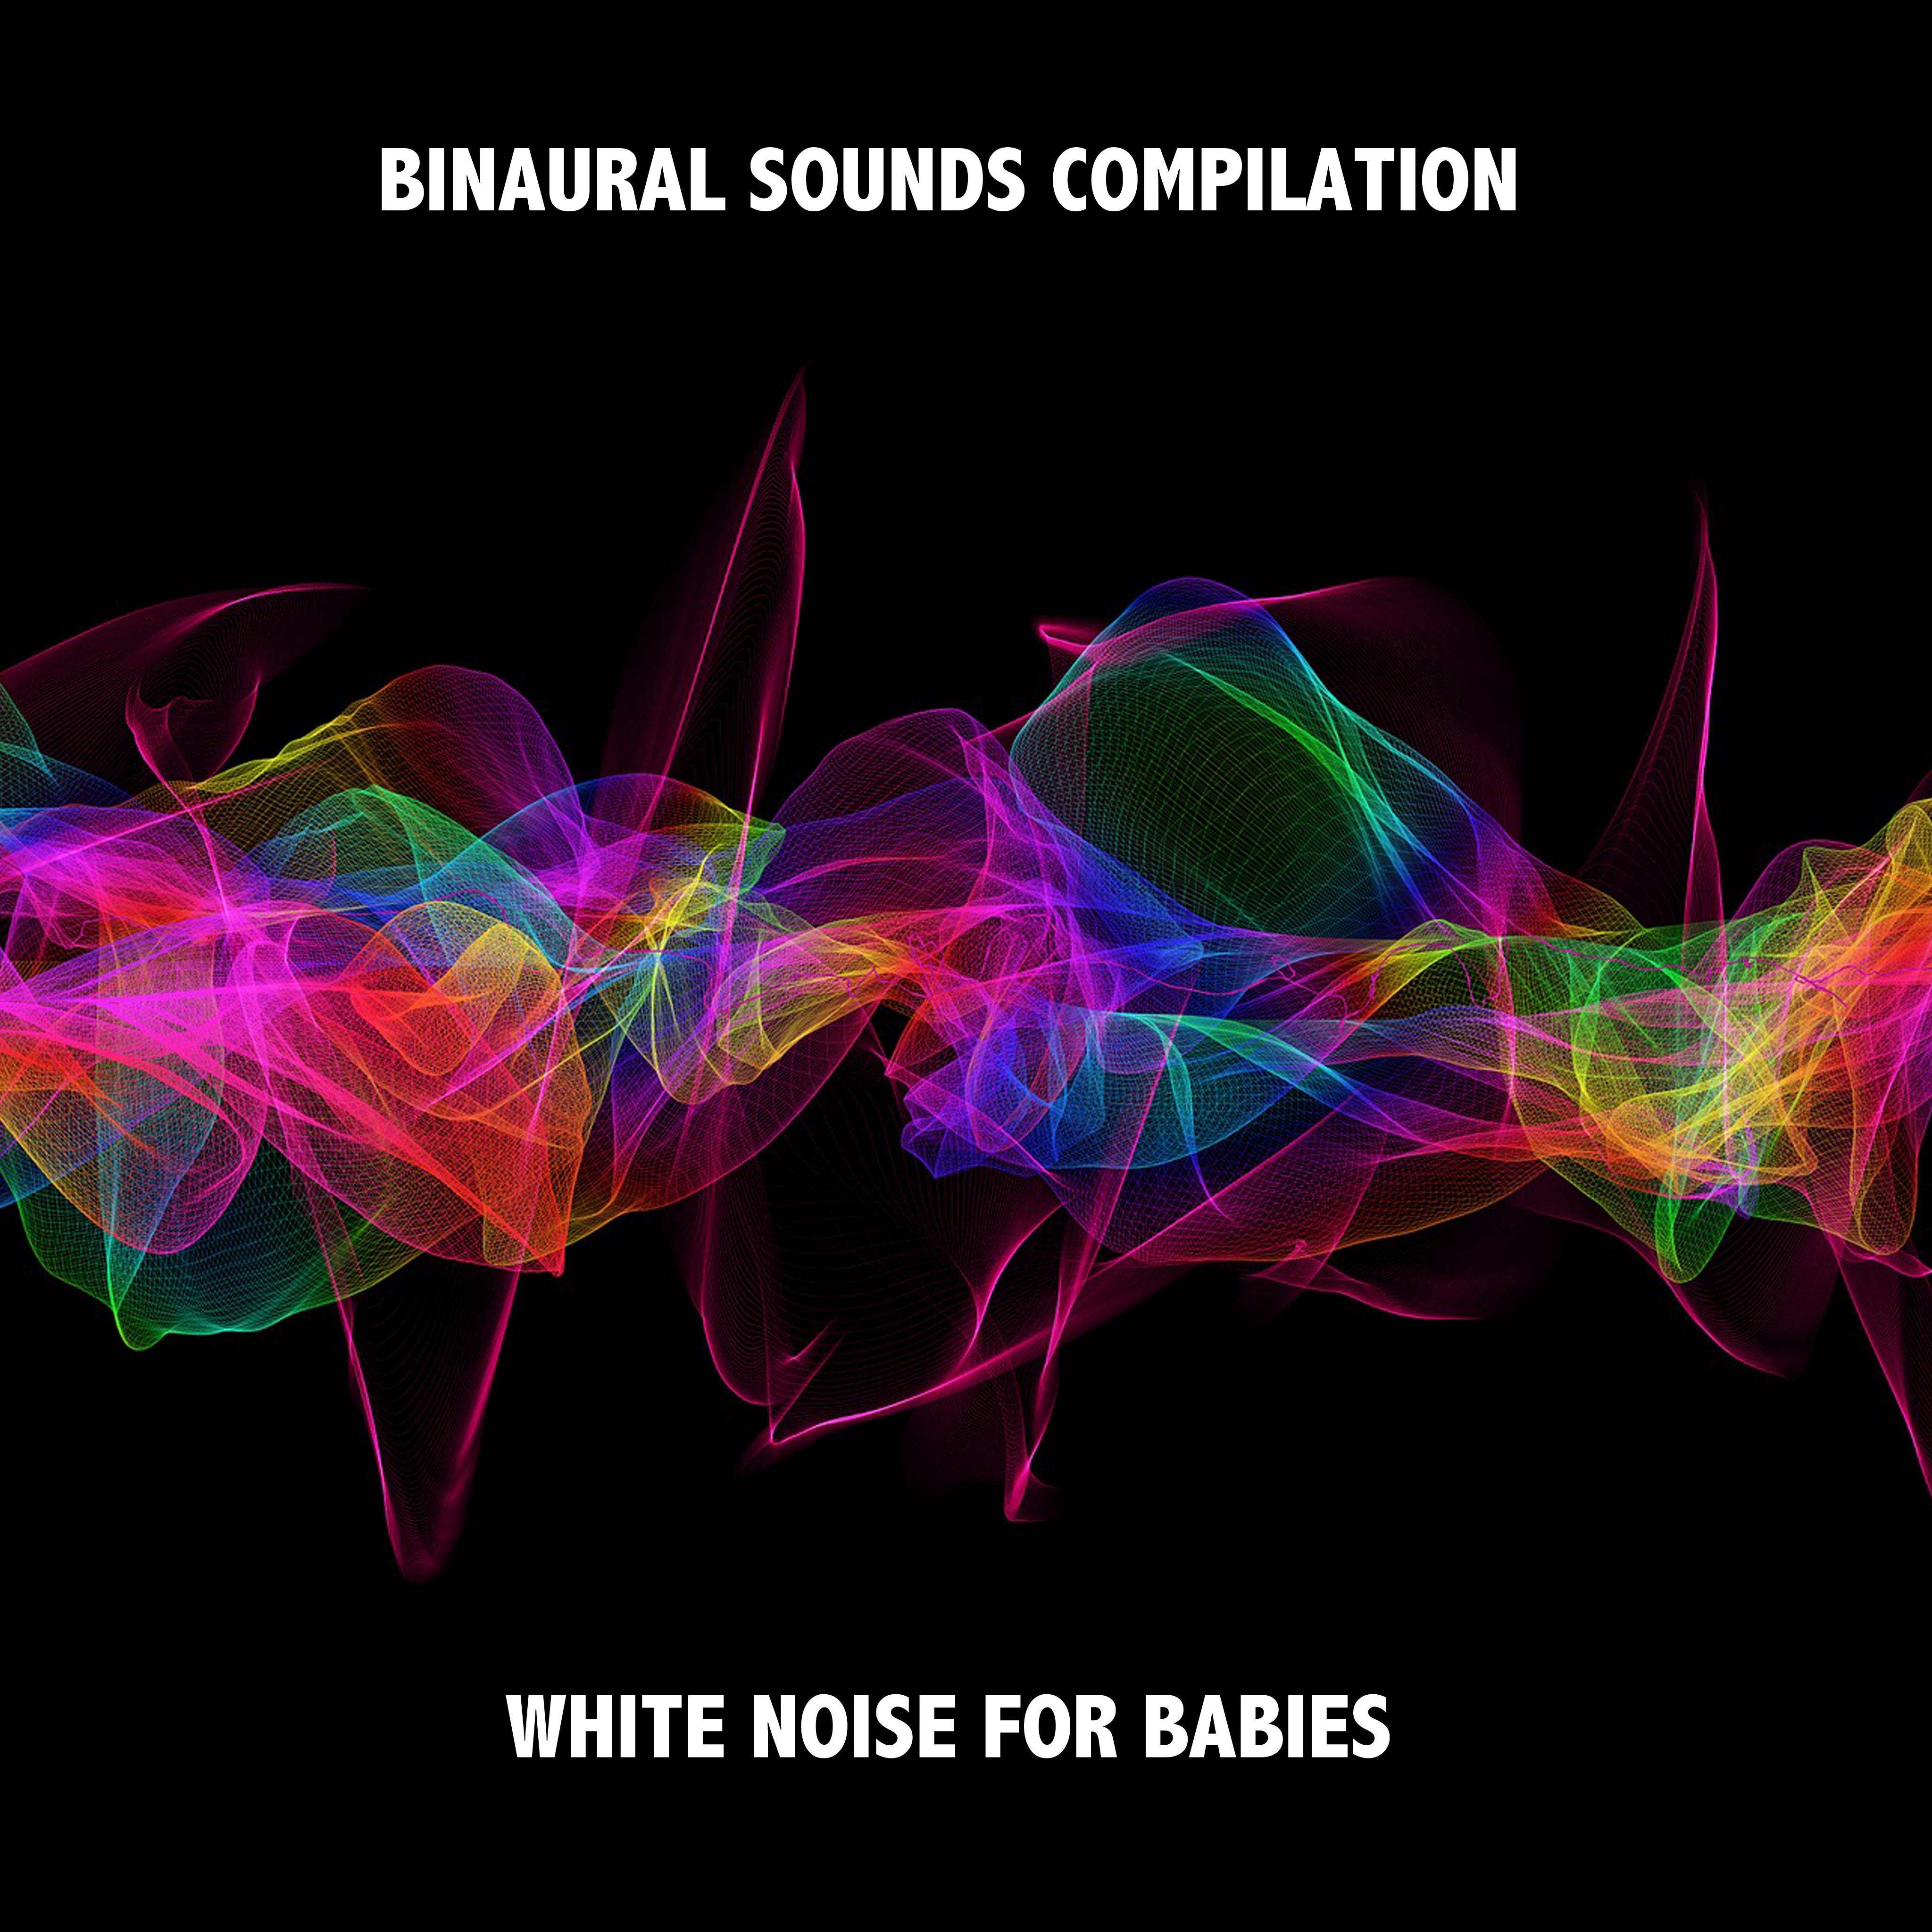 14 Binaural Sounds Compilation - White Noise for Babies